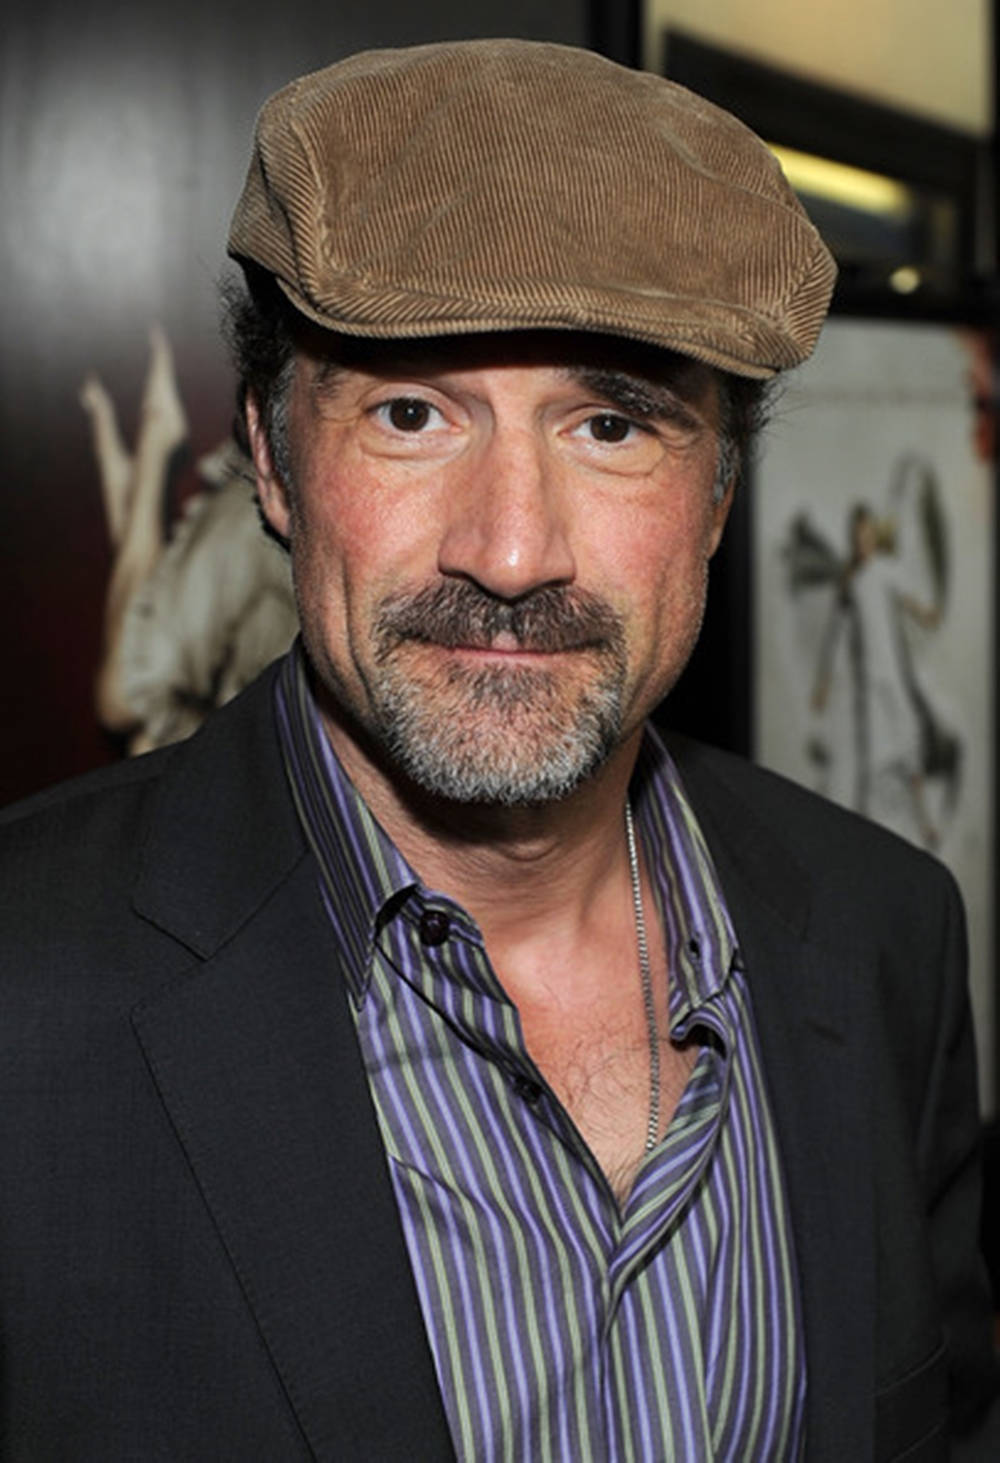 Stripeelias Koteas Is Not A Specific Phrase Related To Computer Or Mobile Wallpaper. However, If You Are Referring To A Computer Or Mobile Wallpaper Featuring The Actor Elias Koteas, The Sentence 